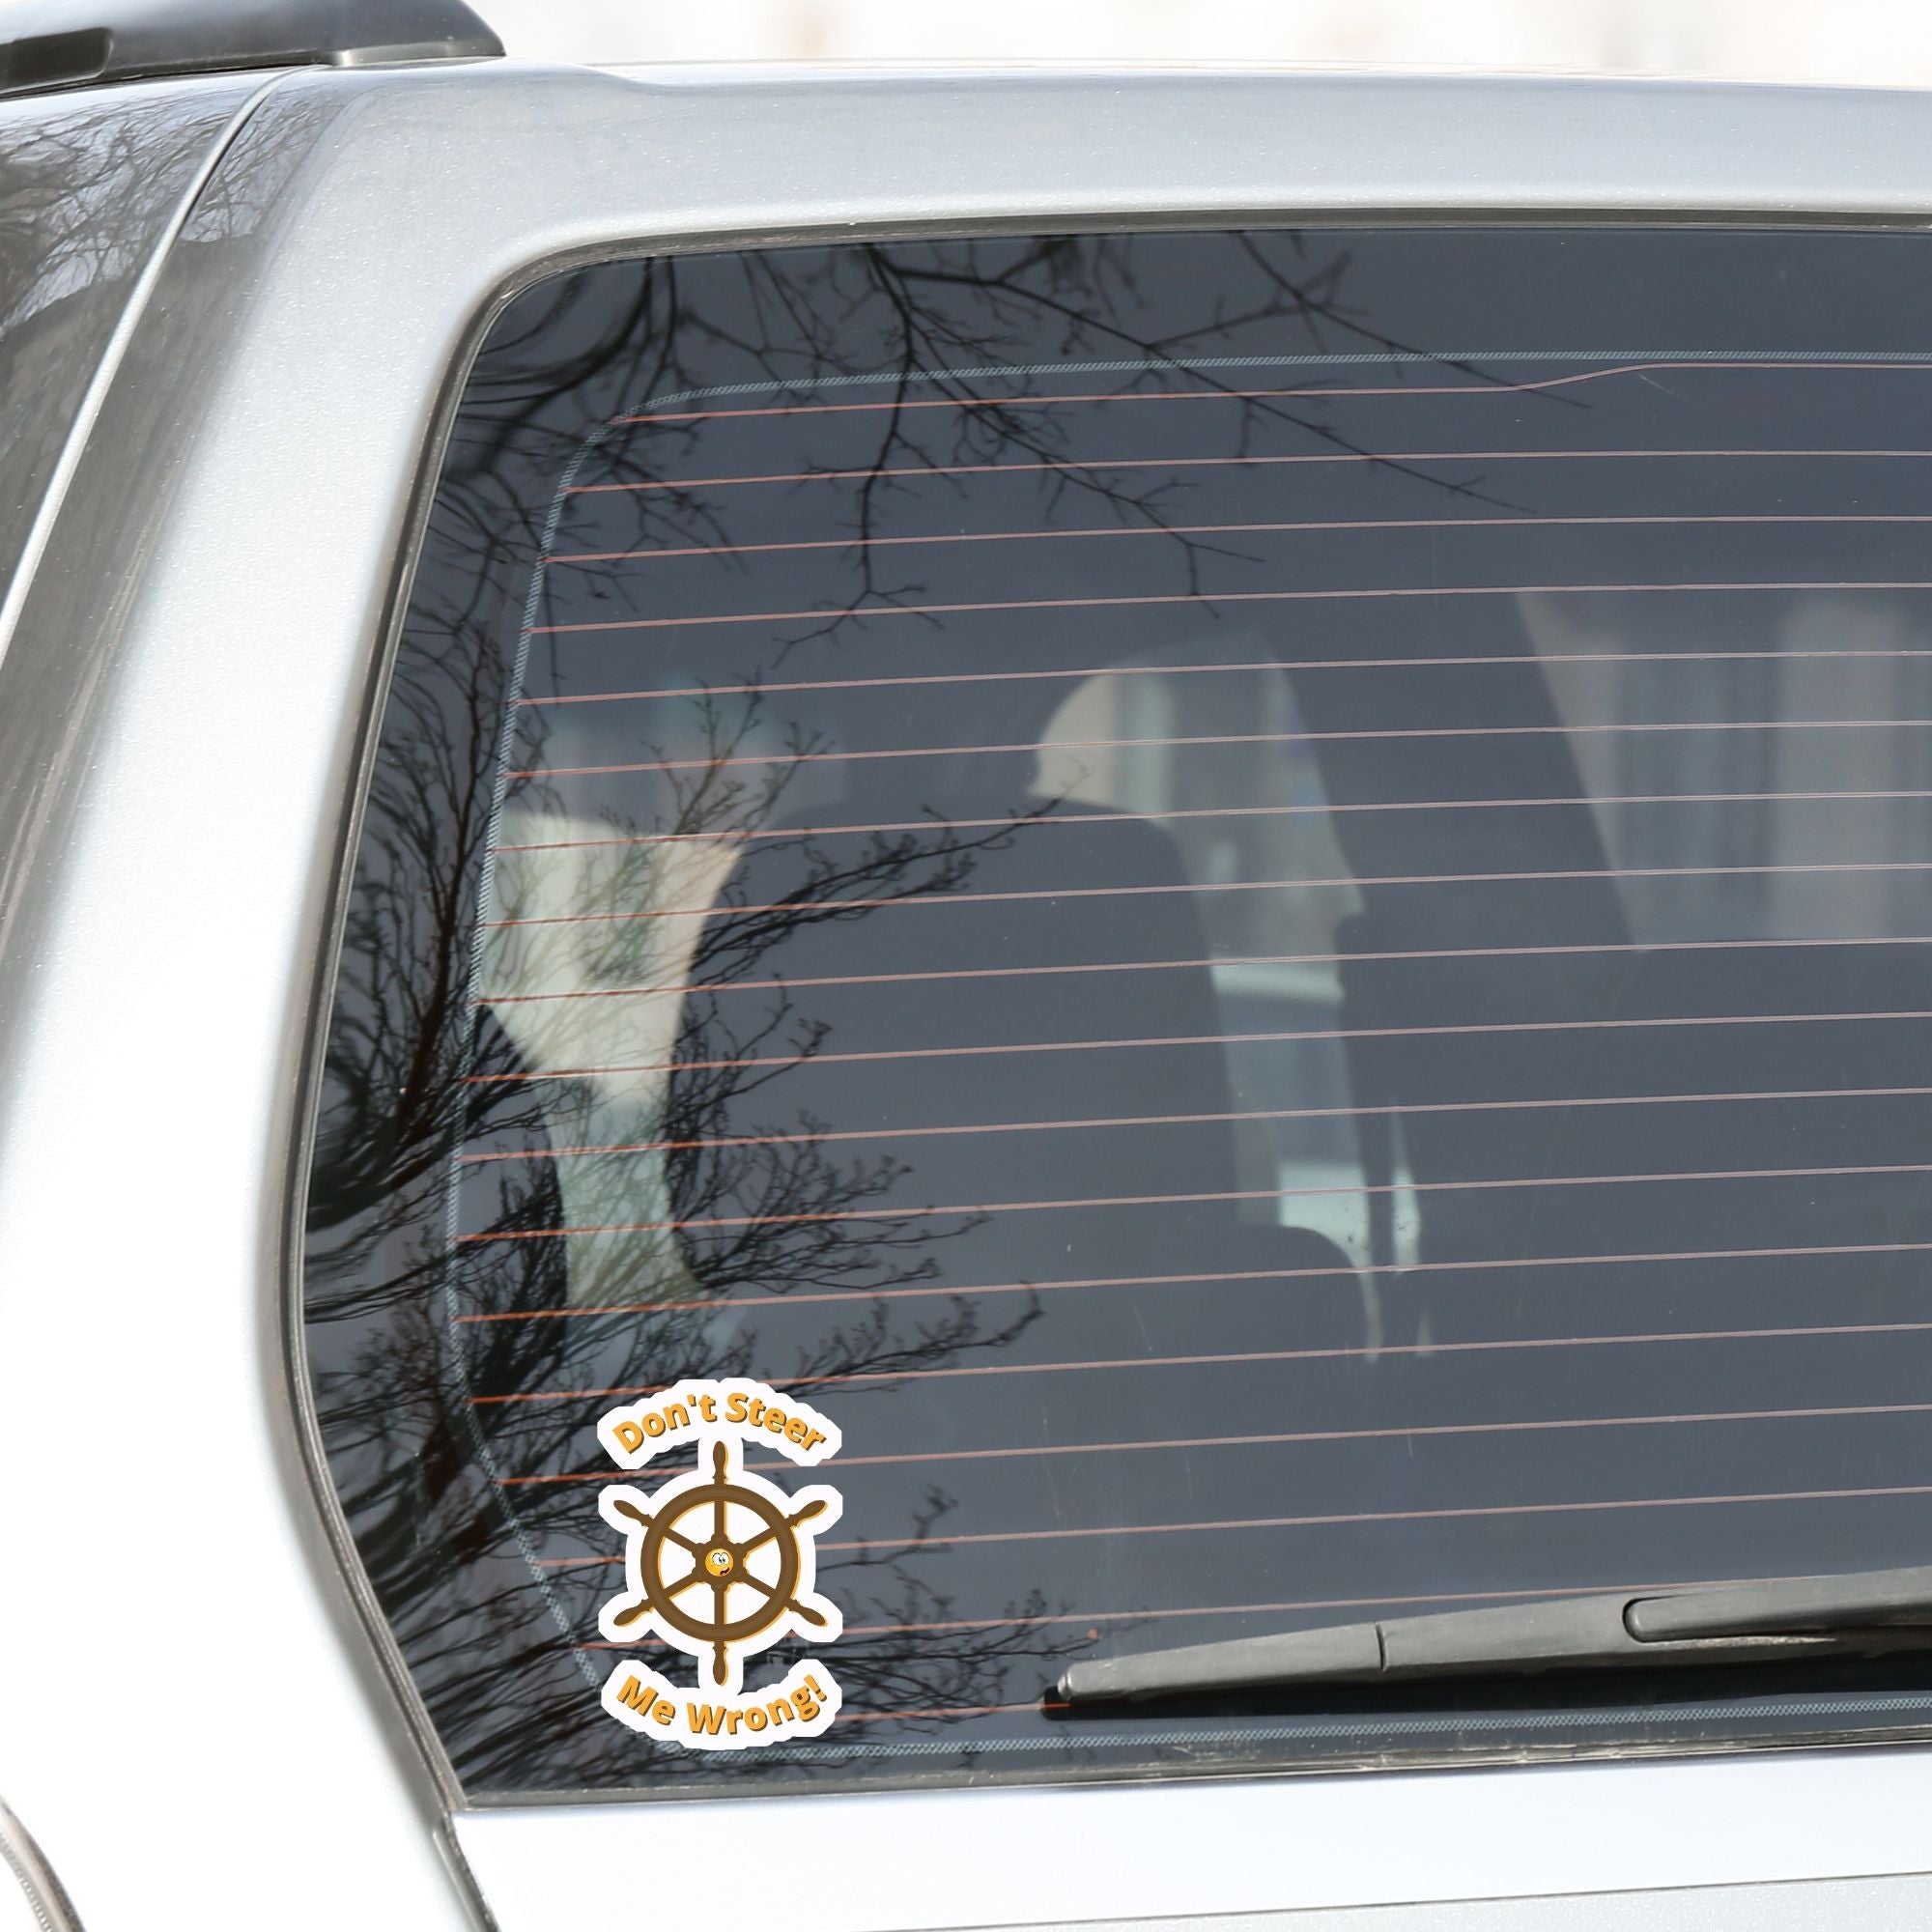 Don't Steer Me Wrong - good words to live by! This individual die-cut sticker features a wooden ship's wheel (tiller) with a shocked emoji face in the center and the words "Don't Steer Me Wrong!" above and below. This image shows the sticker on the back window of a car.